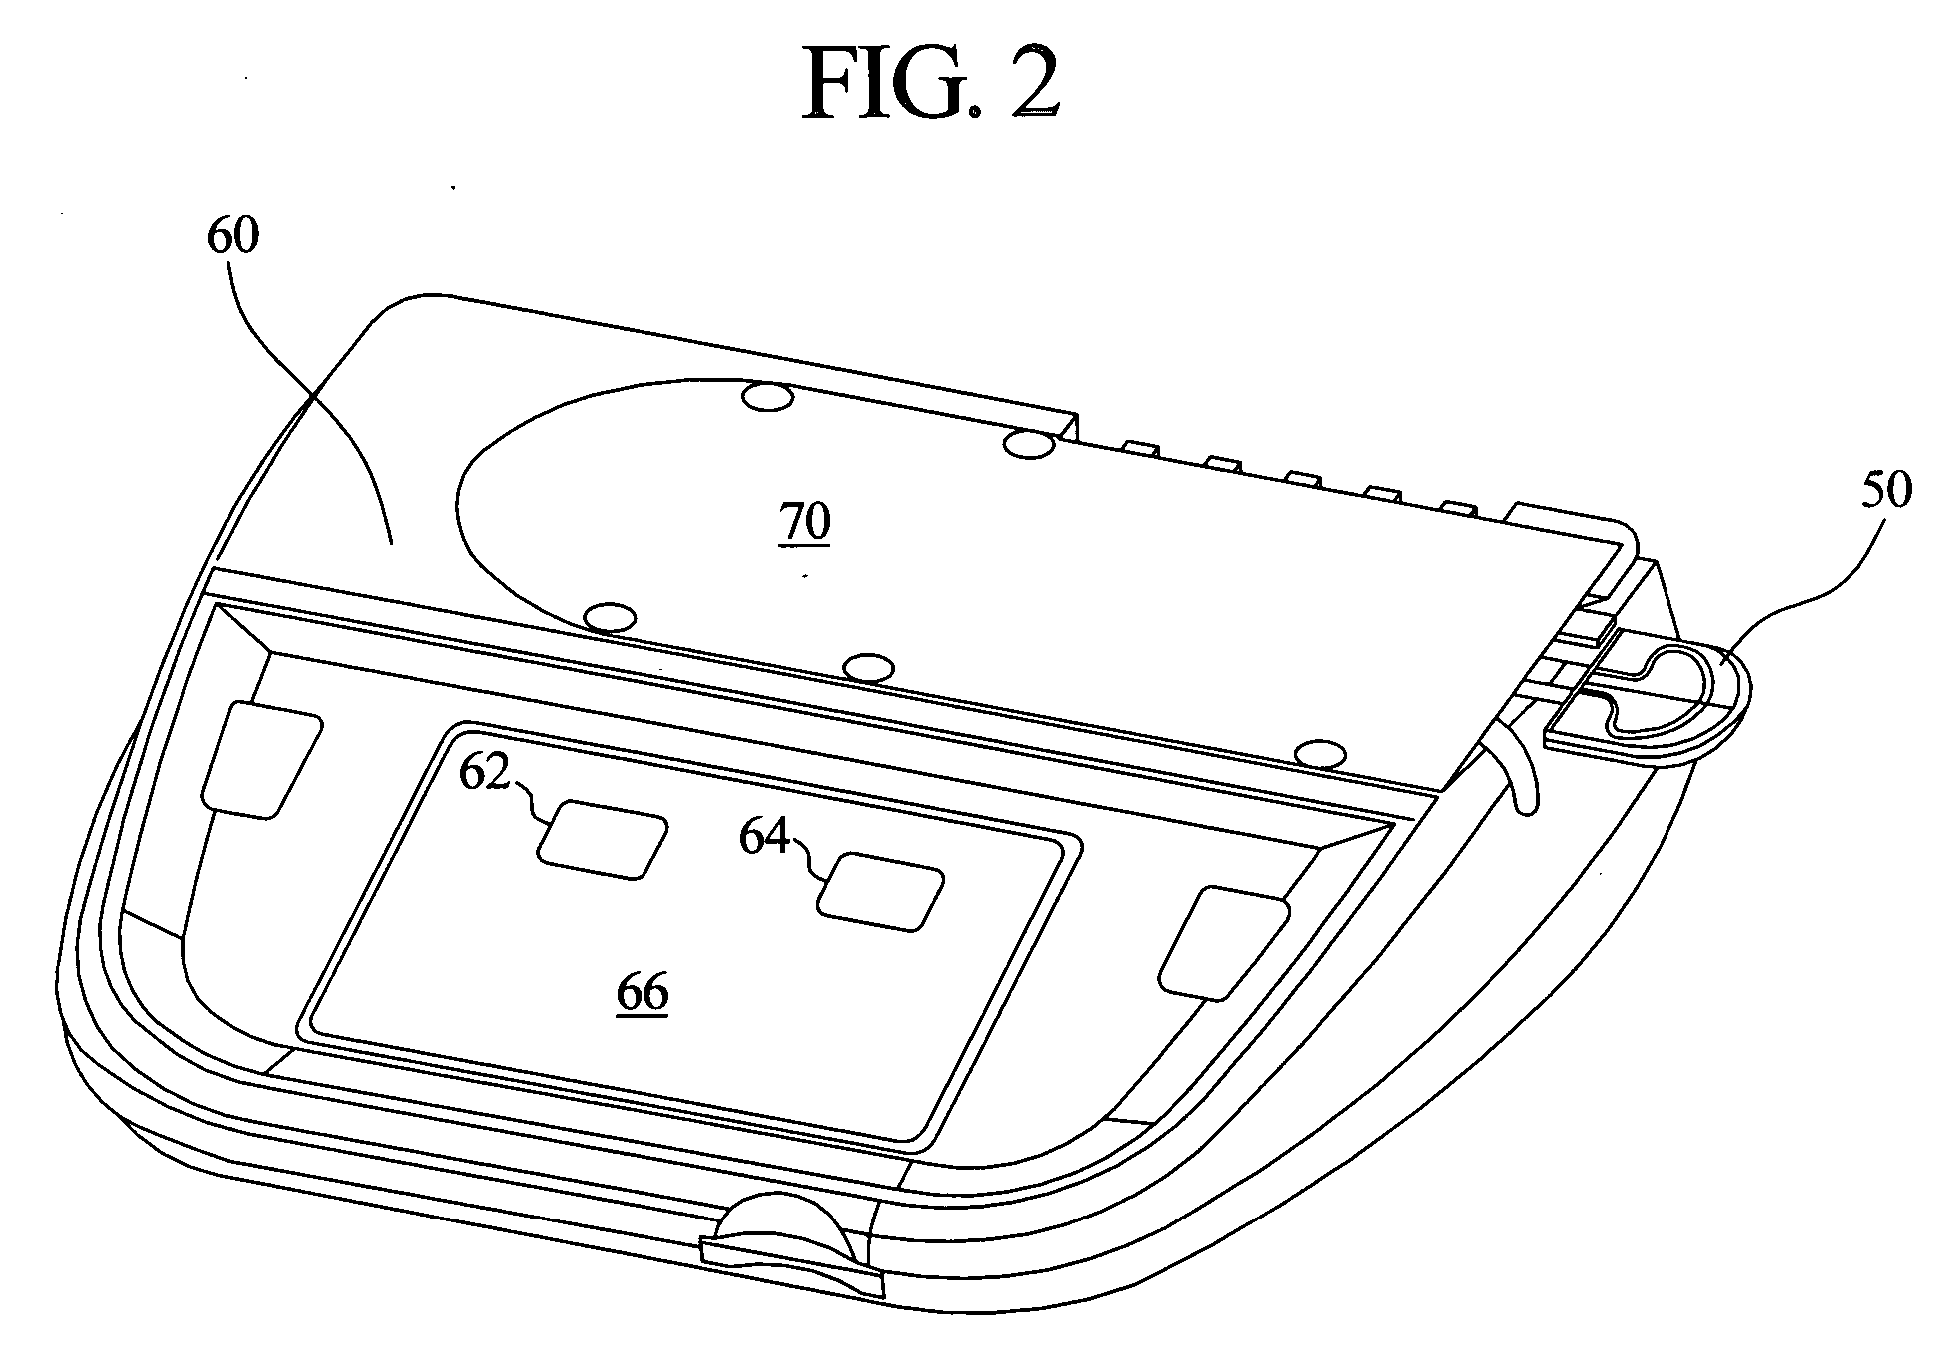 Cassette-based dialysis medical fluid therapy systems, apparatuses and methods